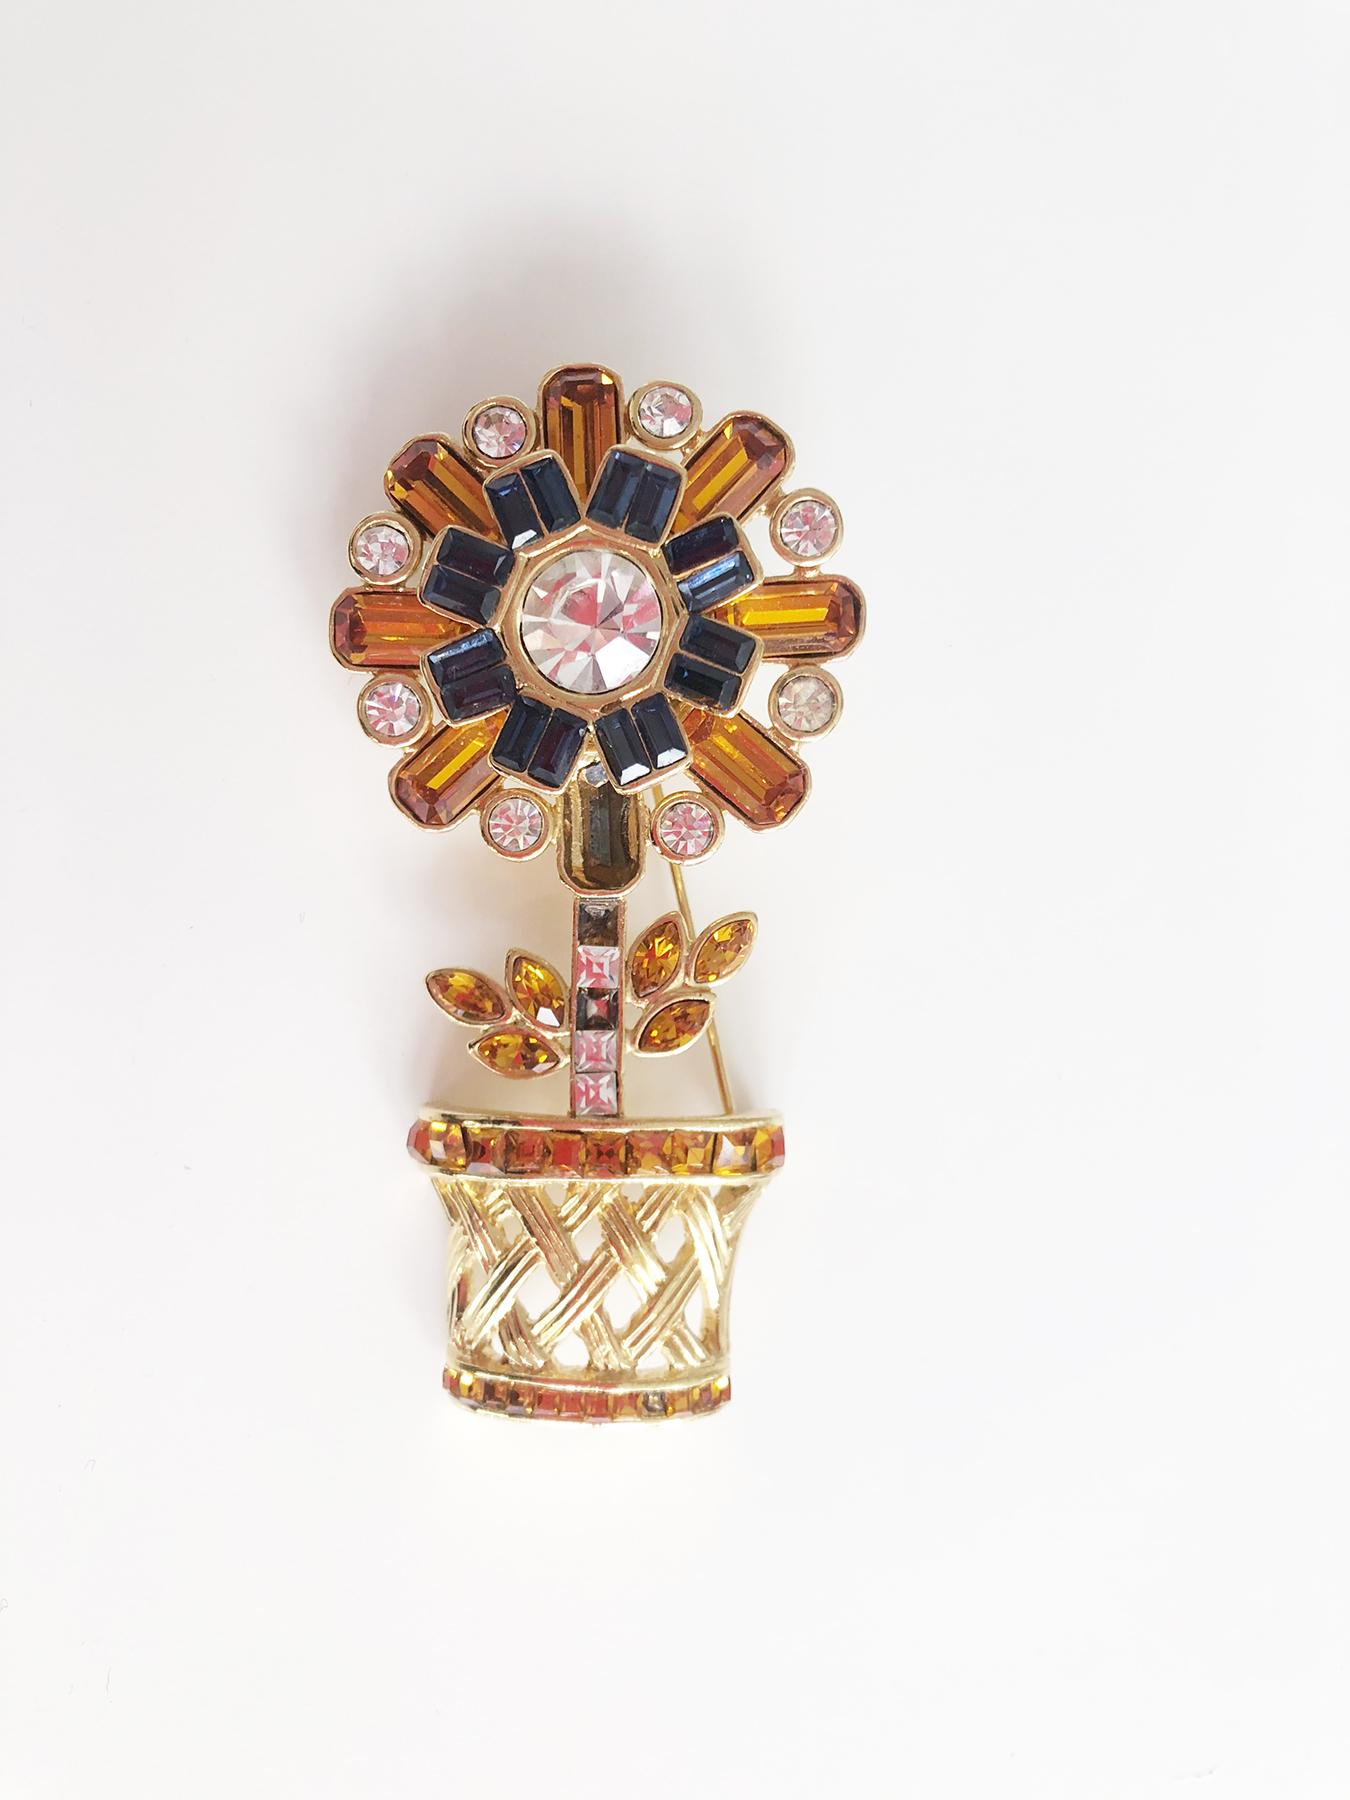 Elegant brooch by the famous stylist Valentino from Italy 90s. The brooch is shaped like a vase with a well-defined flower. The design of the vase is reproduced by metal weaving and the flower is set with various yellow and blue coloured stones. On